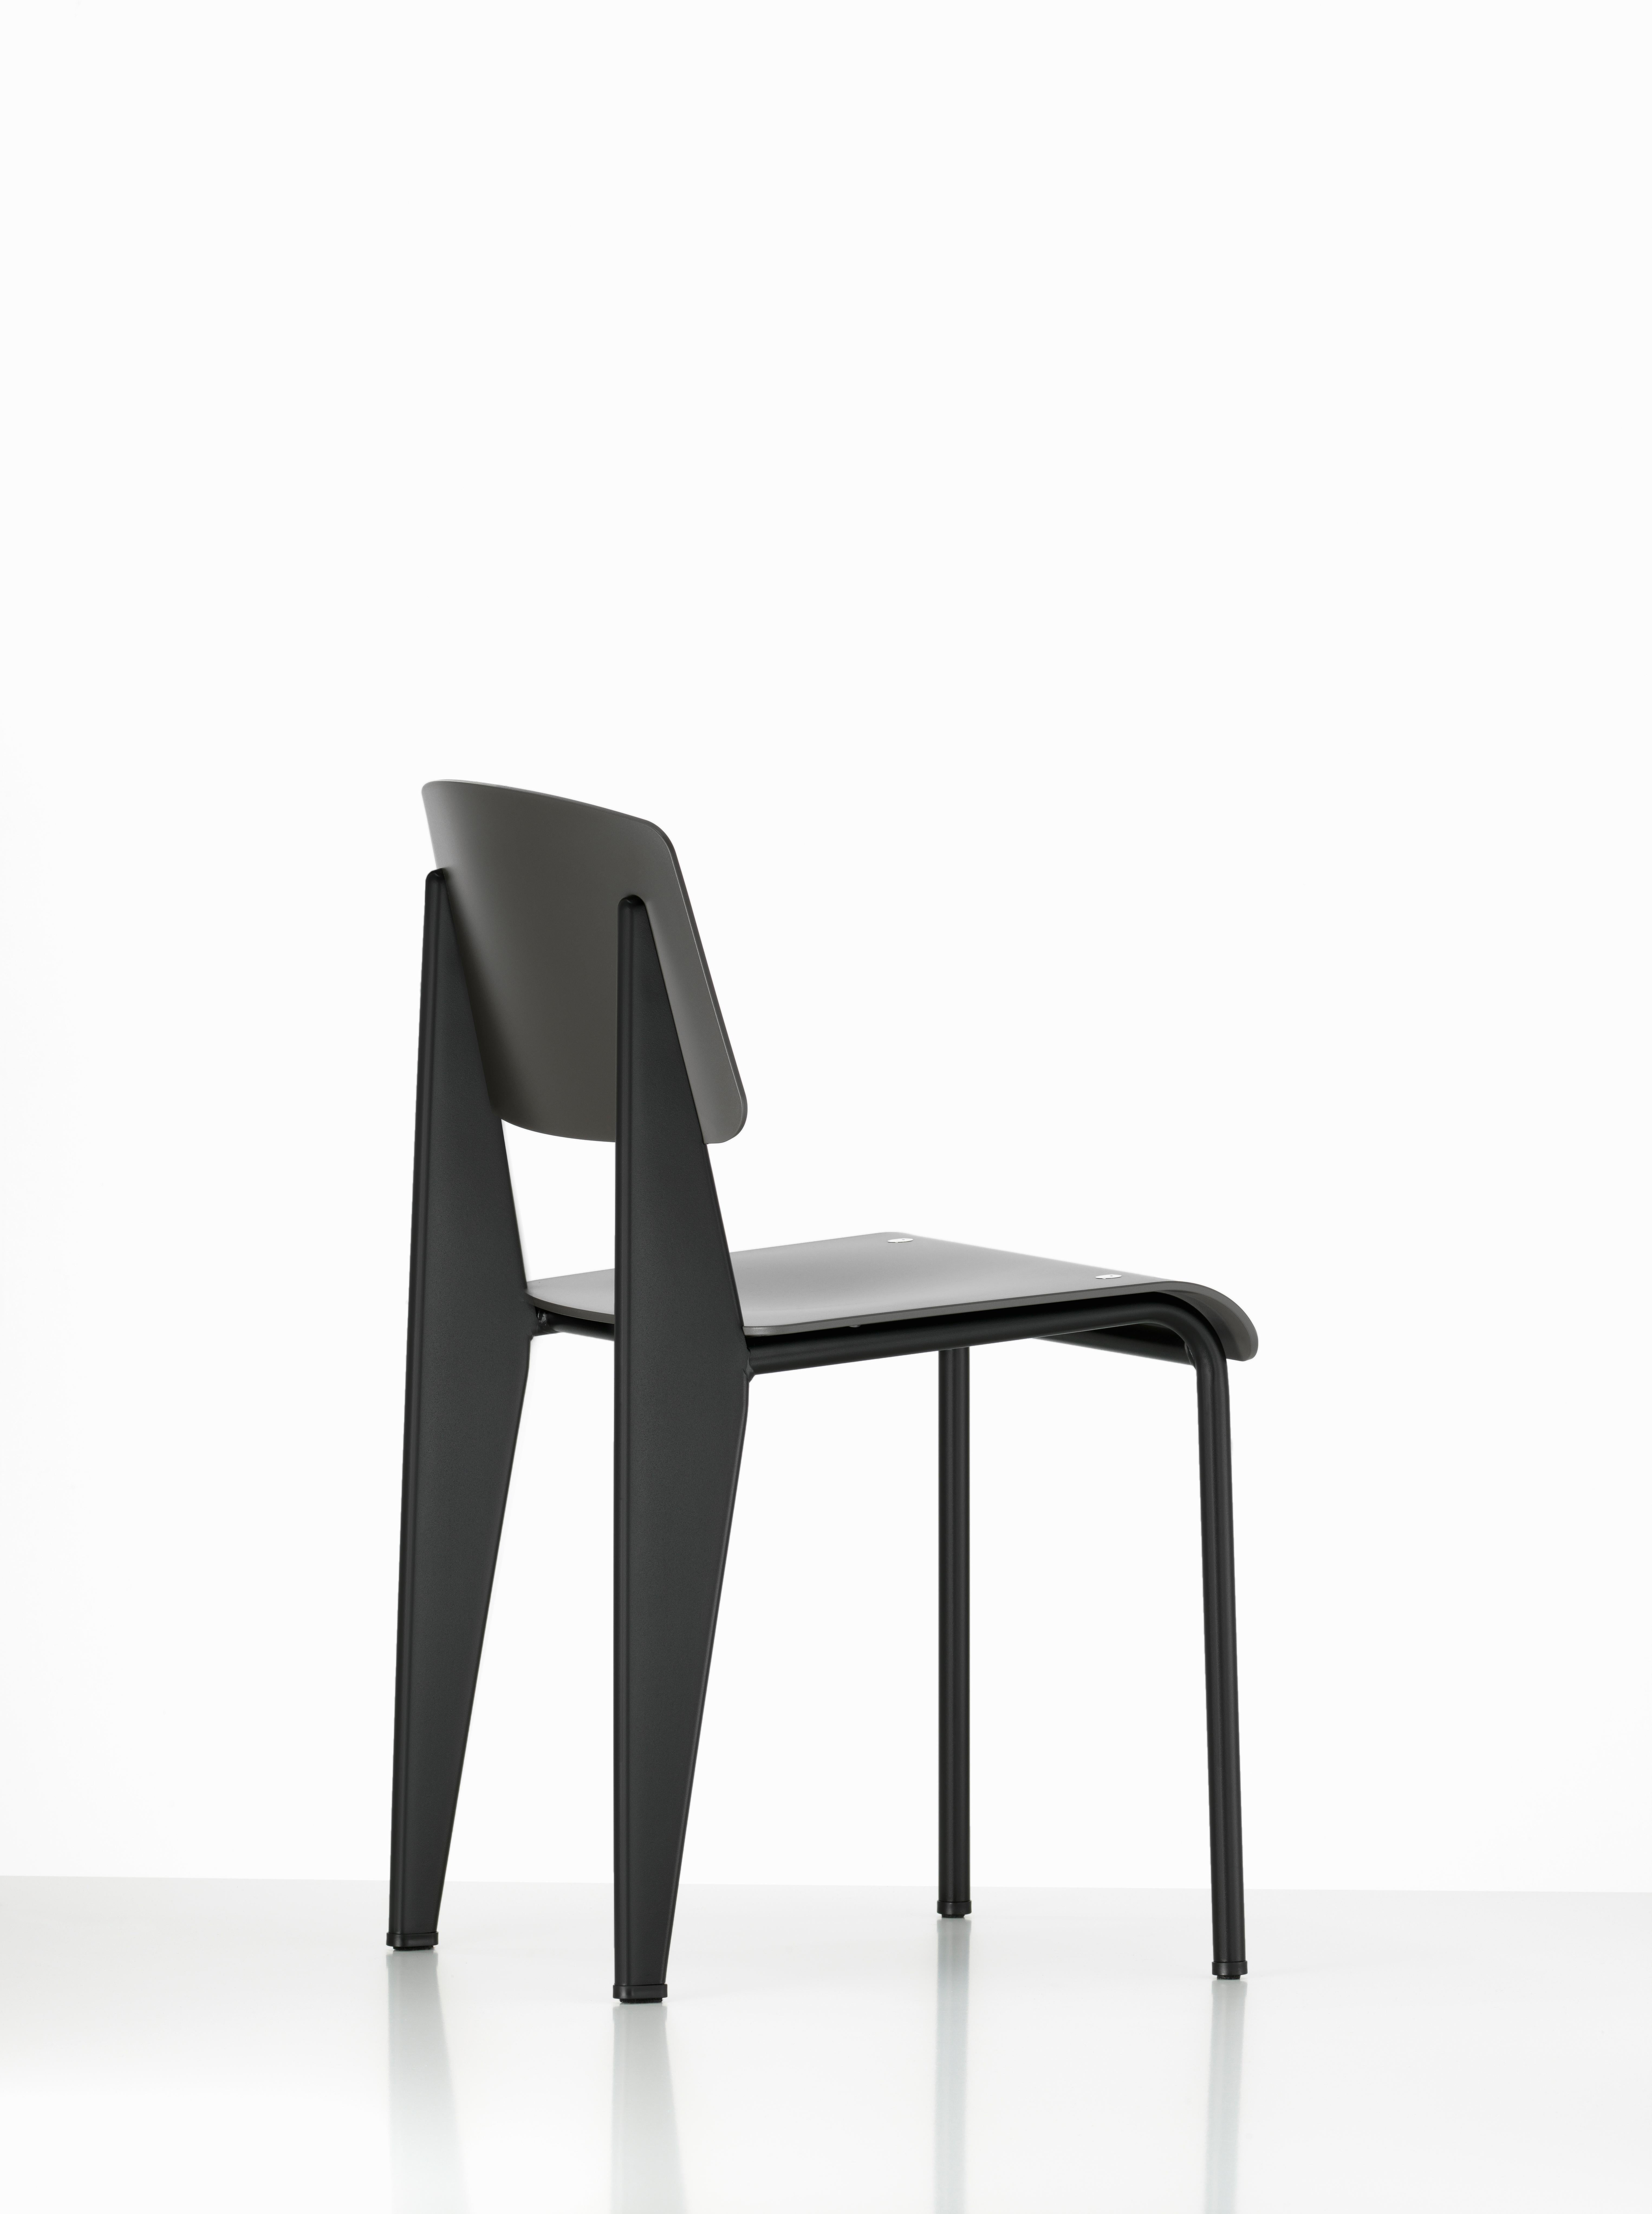 Jean Prouvé standard chair SP in black for Vitra. The standard SP chair is a modernized variation on an early masterpiece by the French designer and engineer Jean Prouvé. Originally designed in 1934, the Standard evolved into one of the most famous